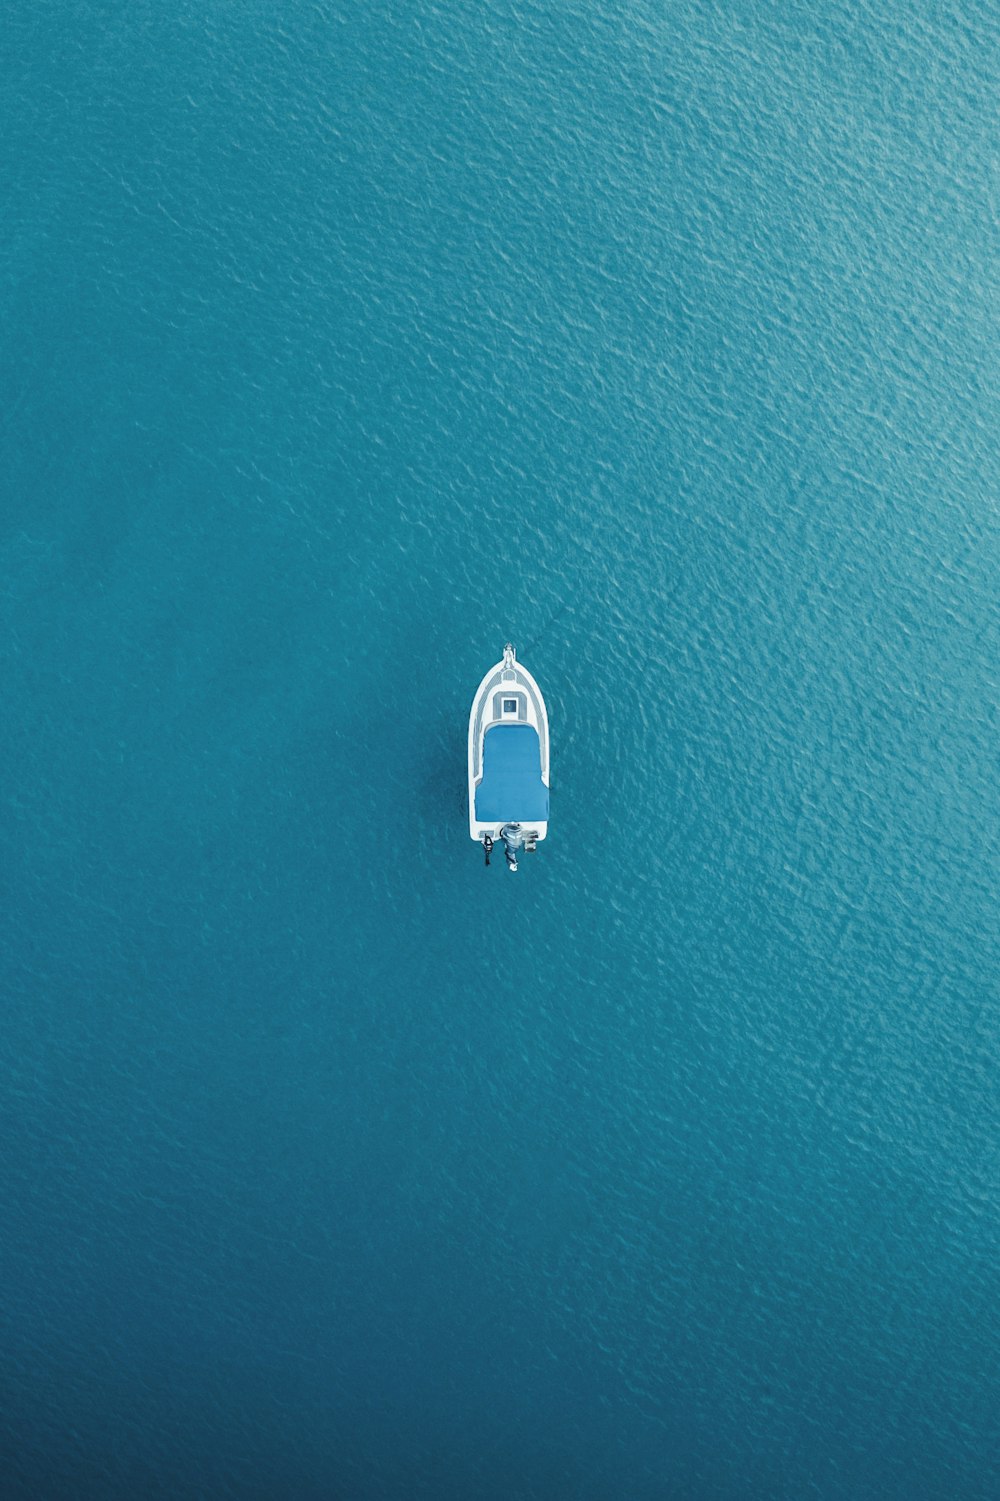 an aerial view of a small boat in the middle of the ocean